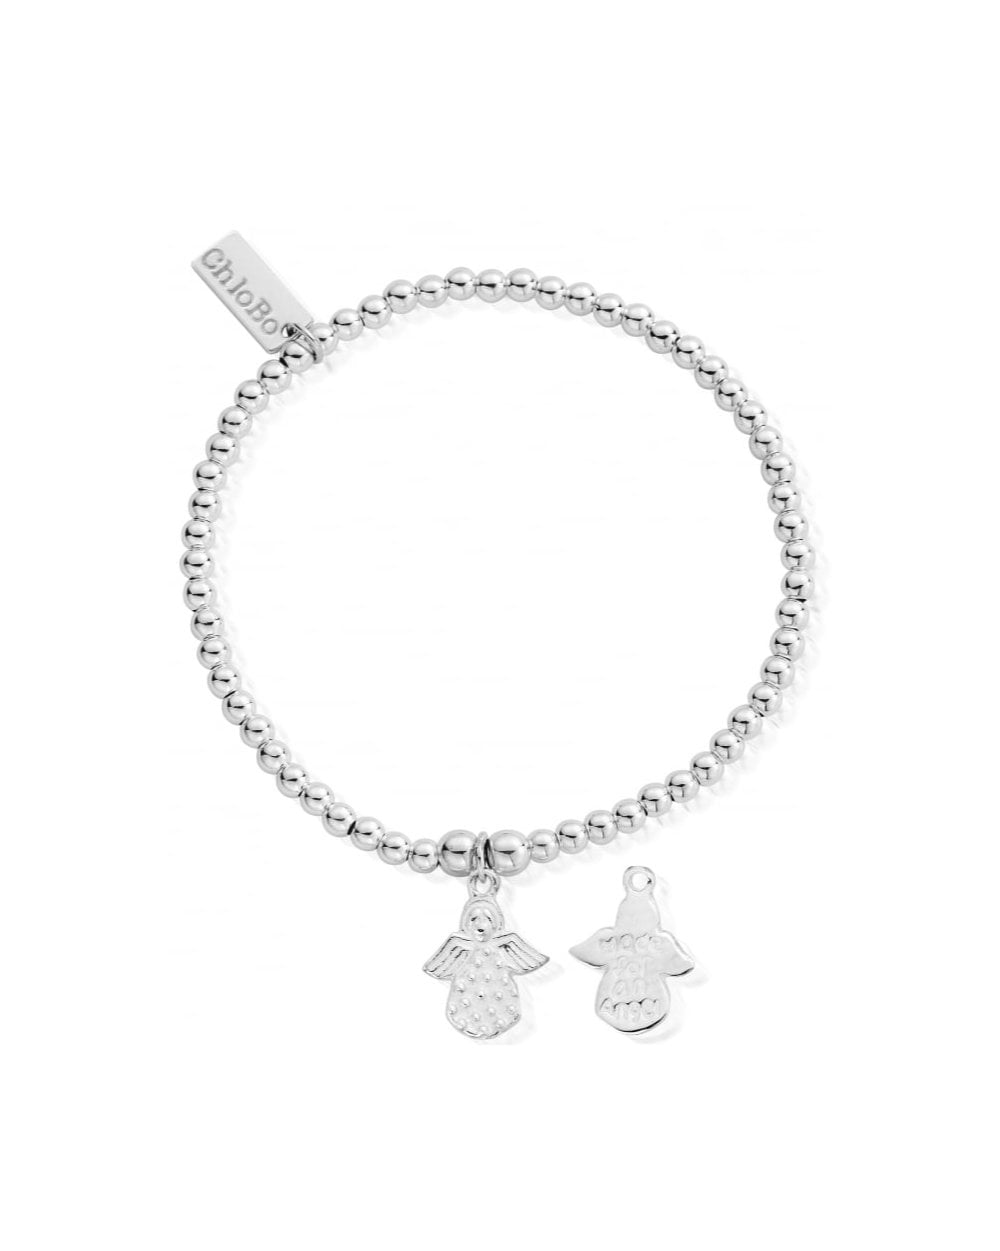 Iconic Silver Cute Charm Mini "Made for an Angel" Bracelet